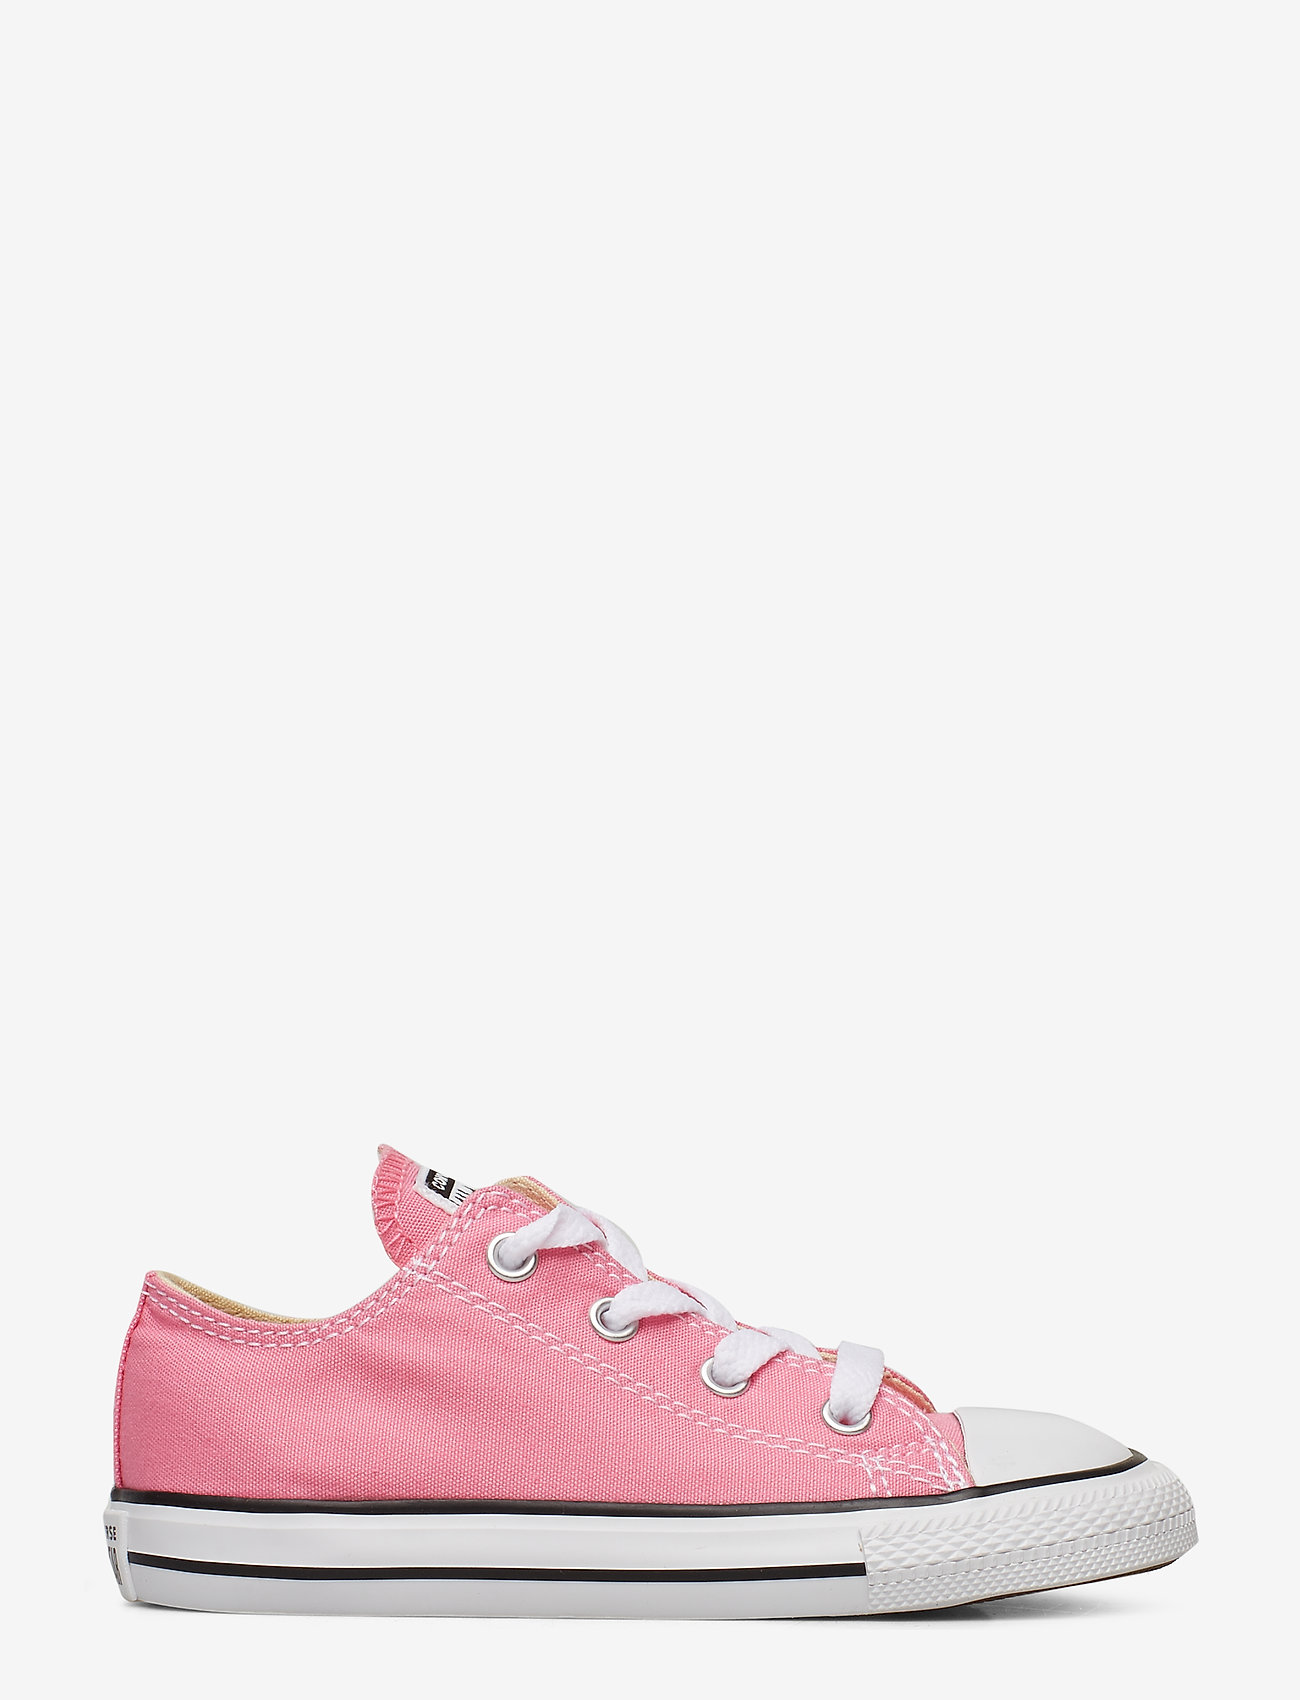 Converse - Chuck Taylor All Star - lapset - pink - 1